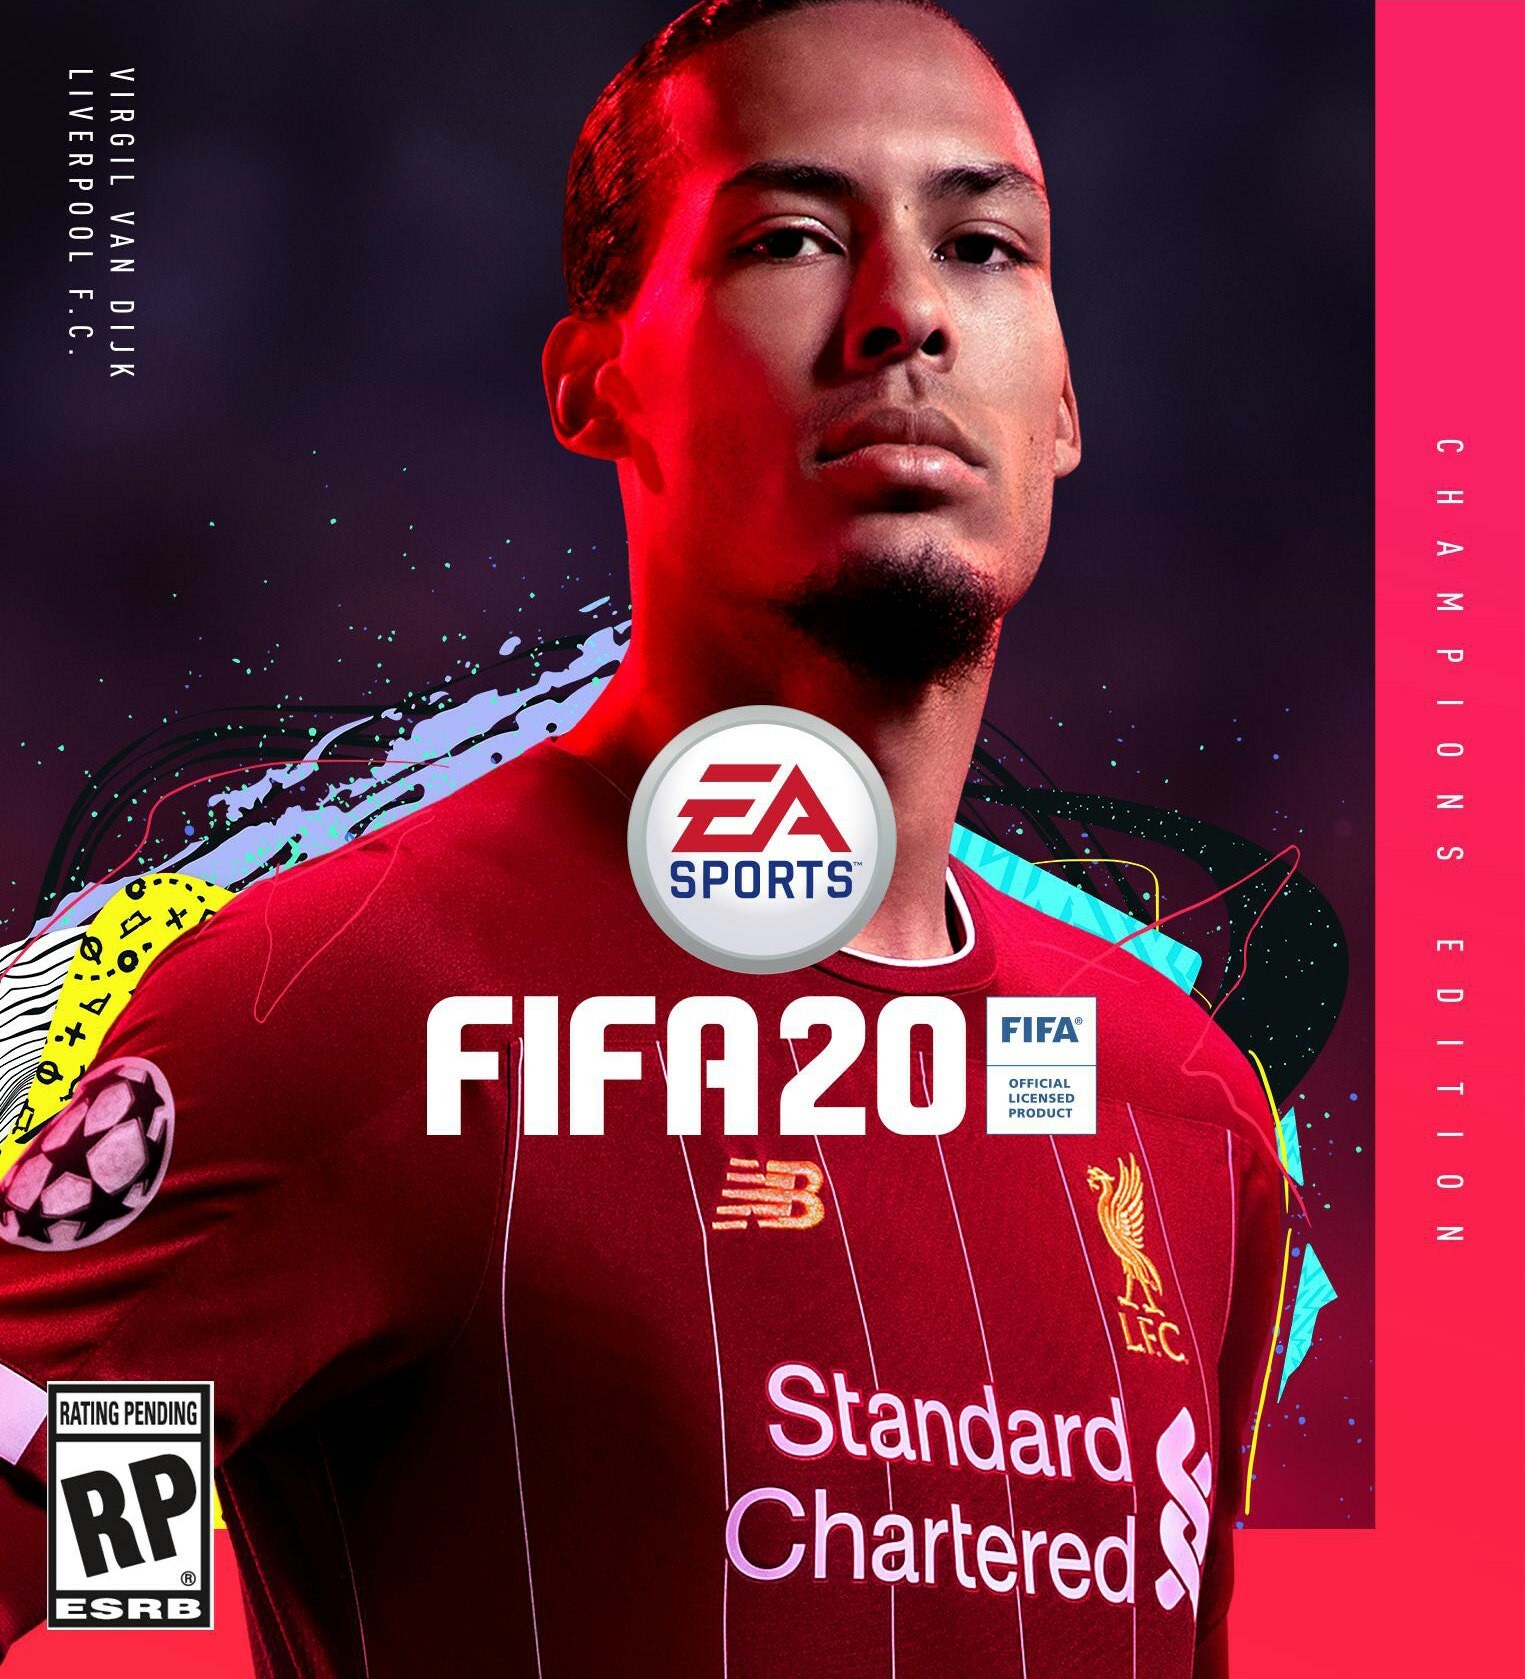 FIFA 20 cover stars revealed! - The Stats Zone